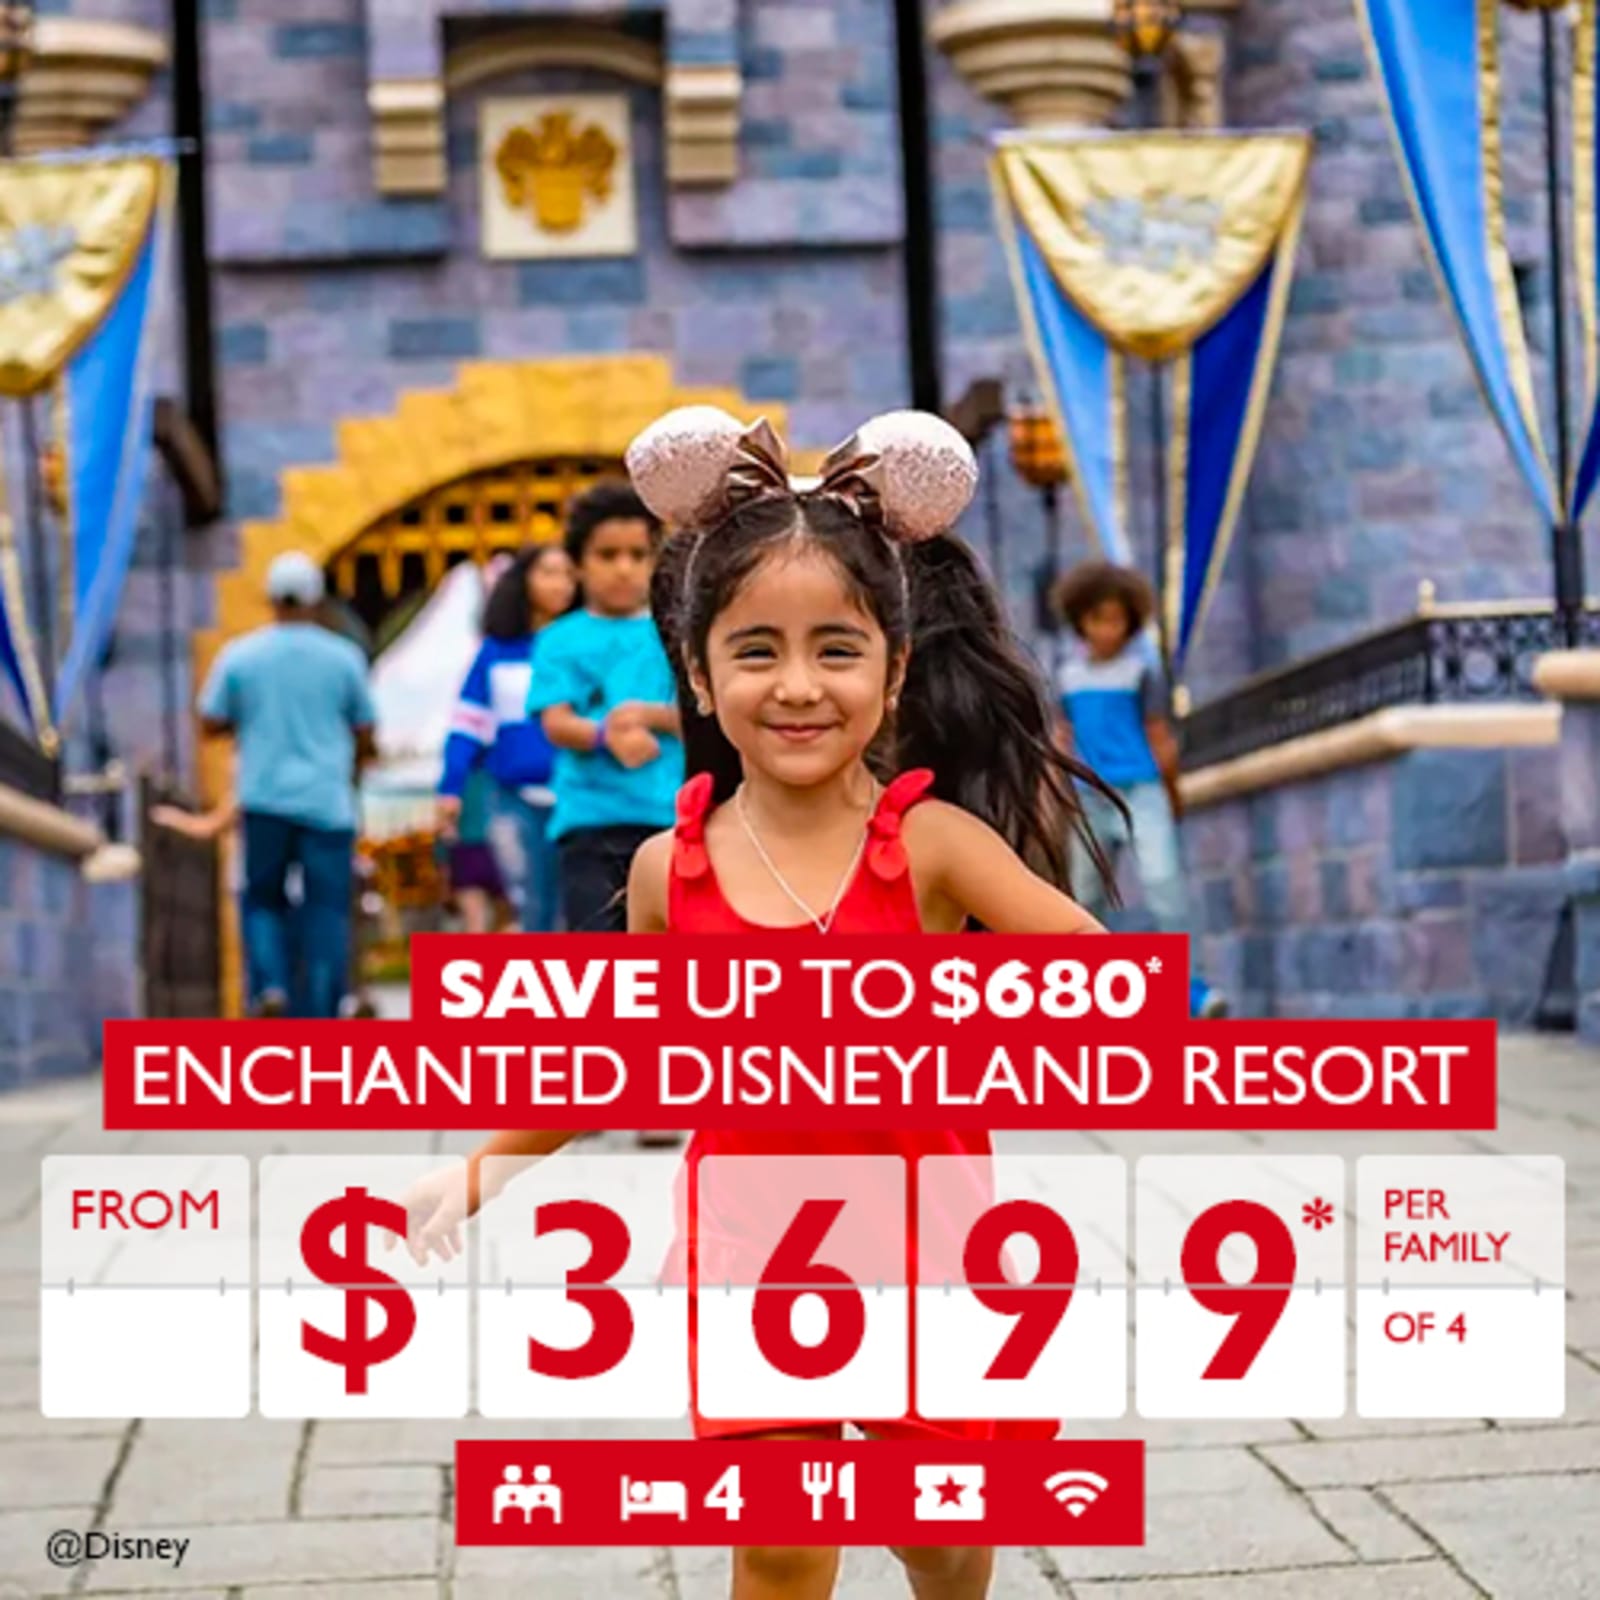 Save up to $680* Enchanted Disneyland Resort from $3699* per family of 4